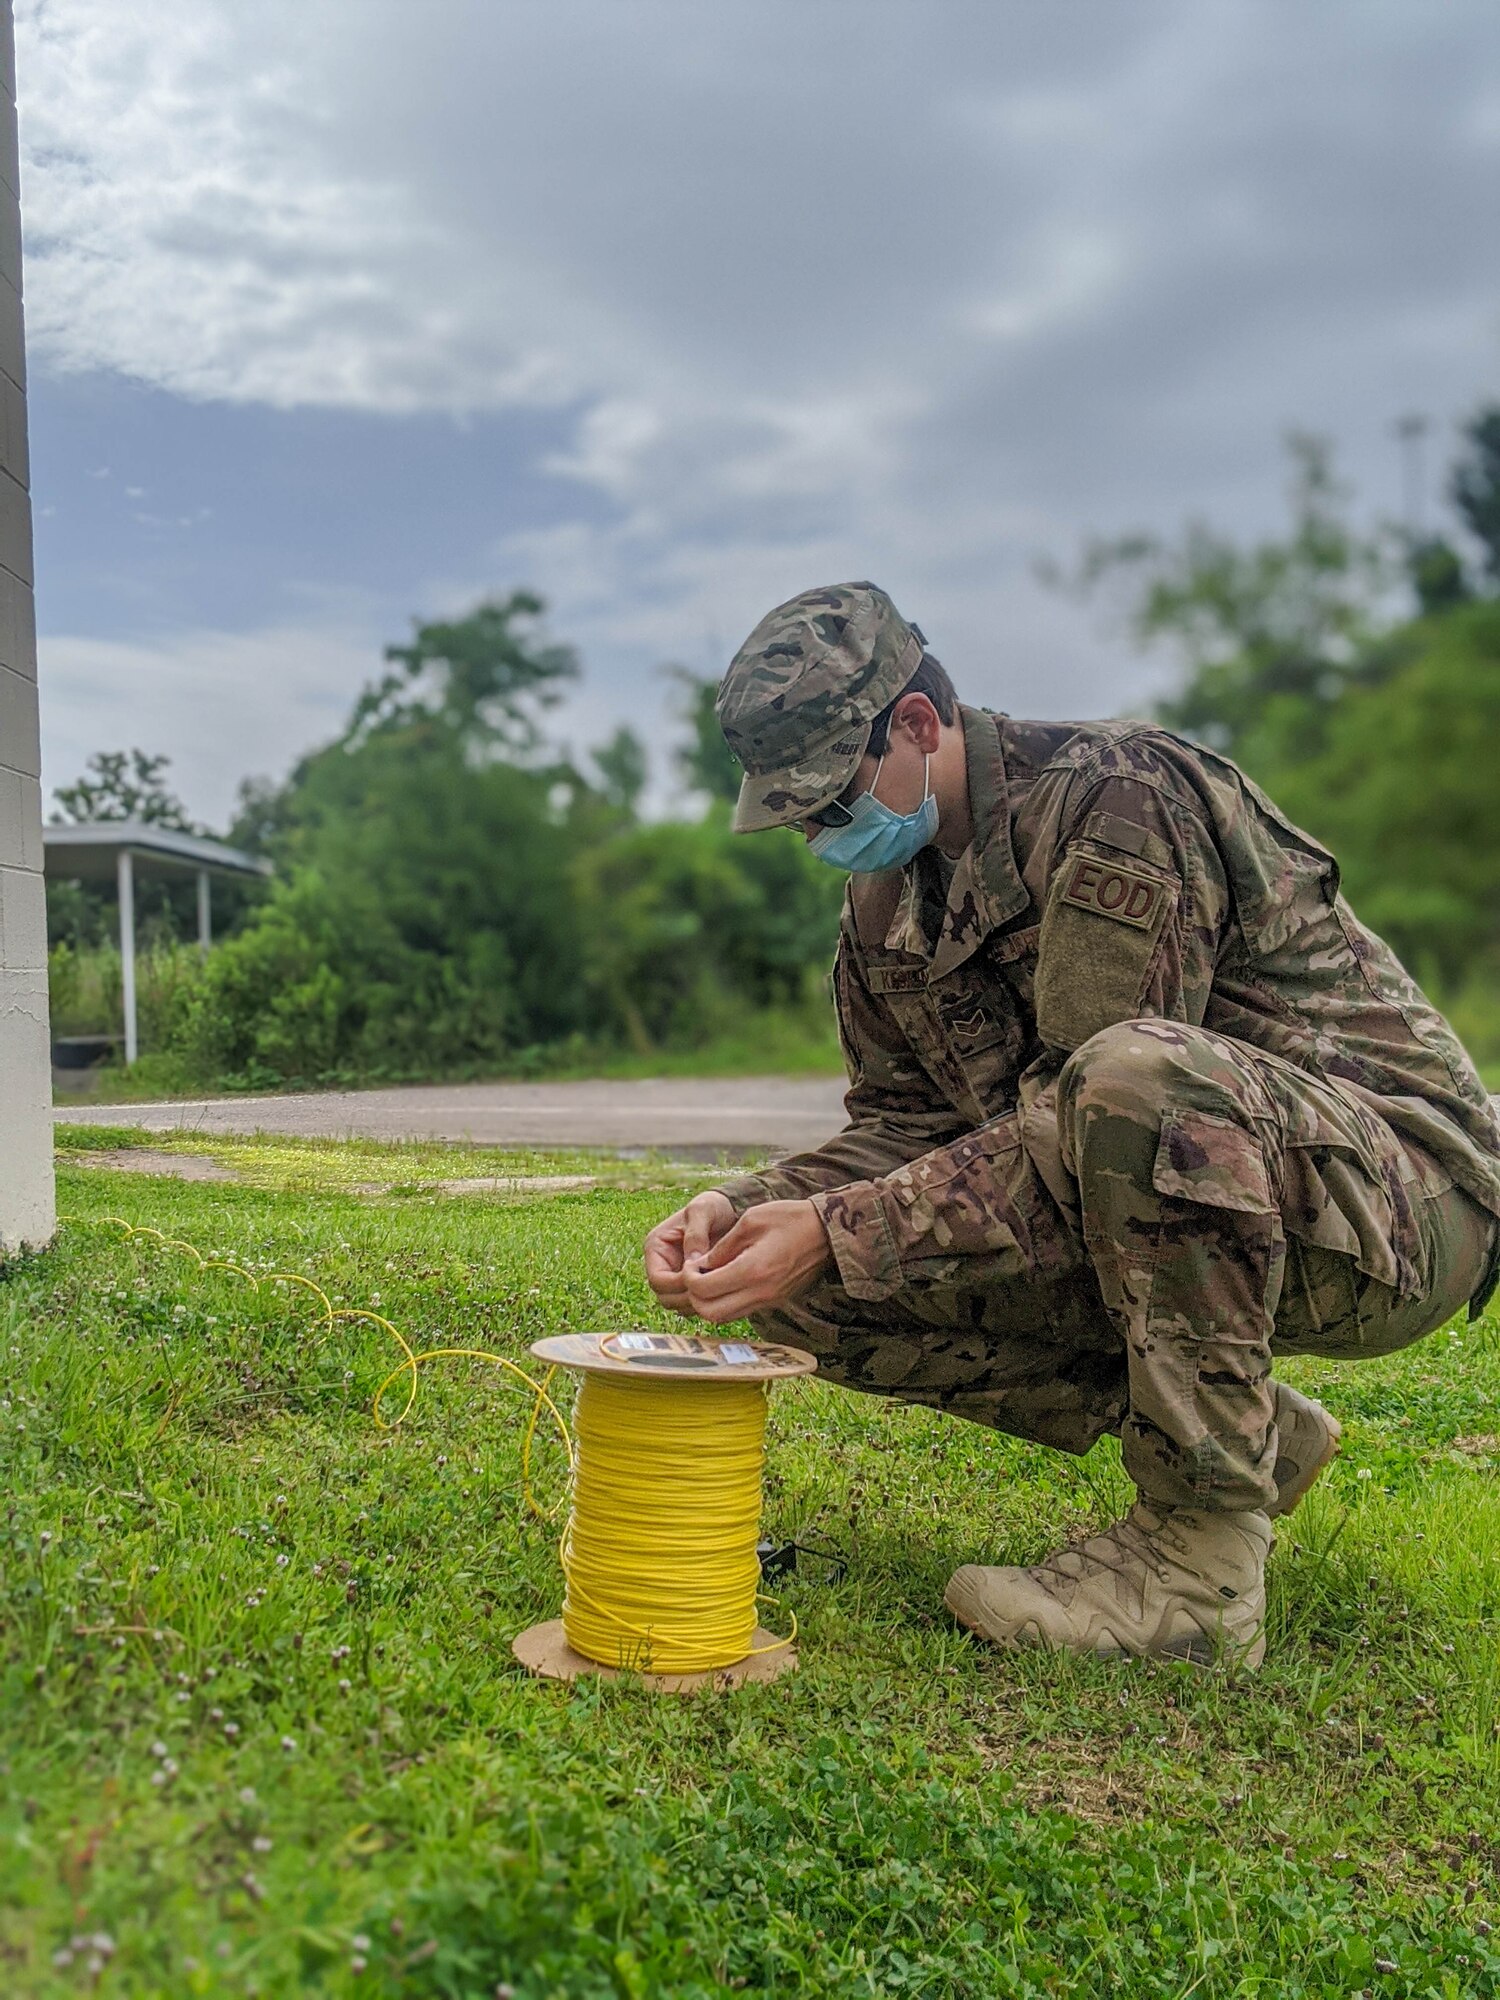 Explosive ordnance disposal technicians keep up-to-date on their training, even with the restrictions placed on the base brought about by COVID-19.